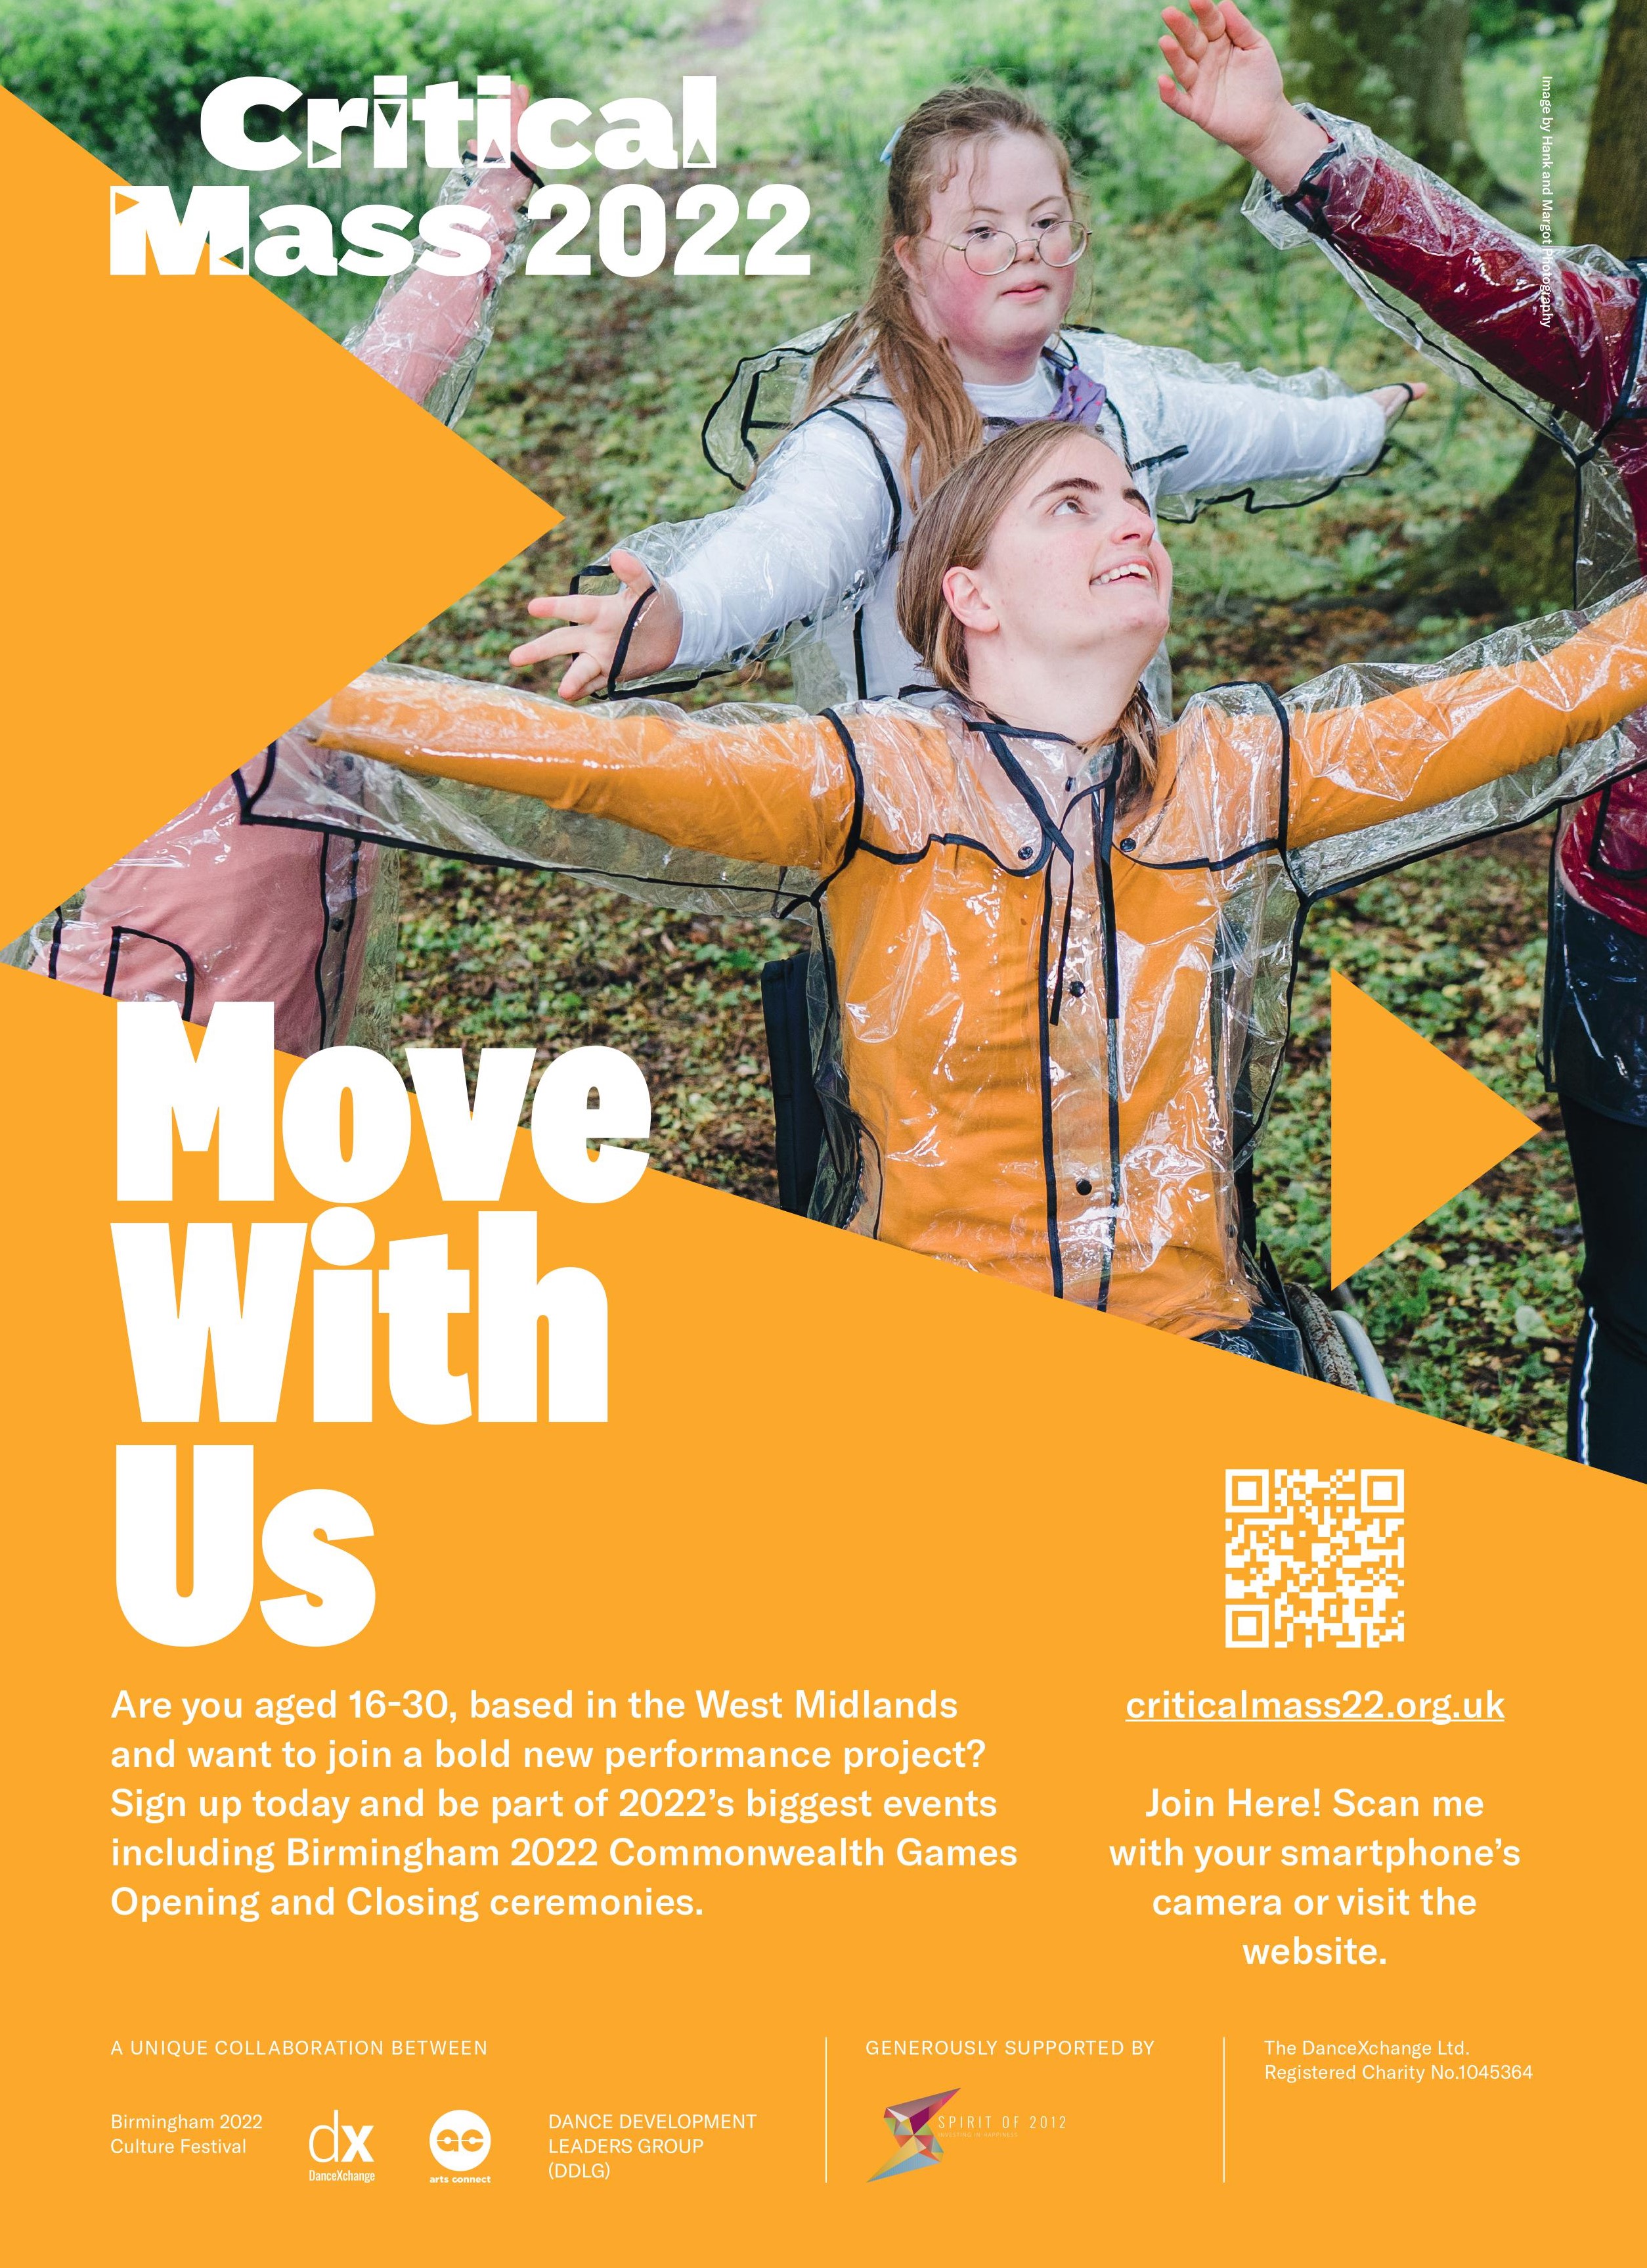 move with us poster displaying two young people with arms outstretched